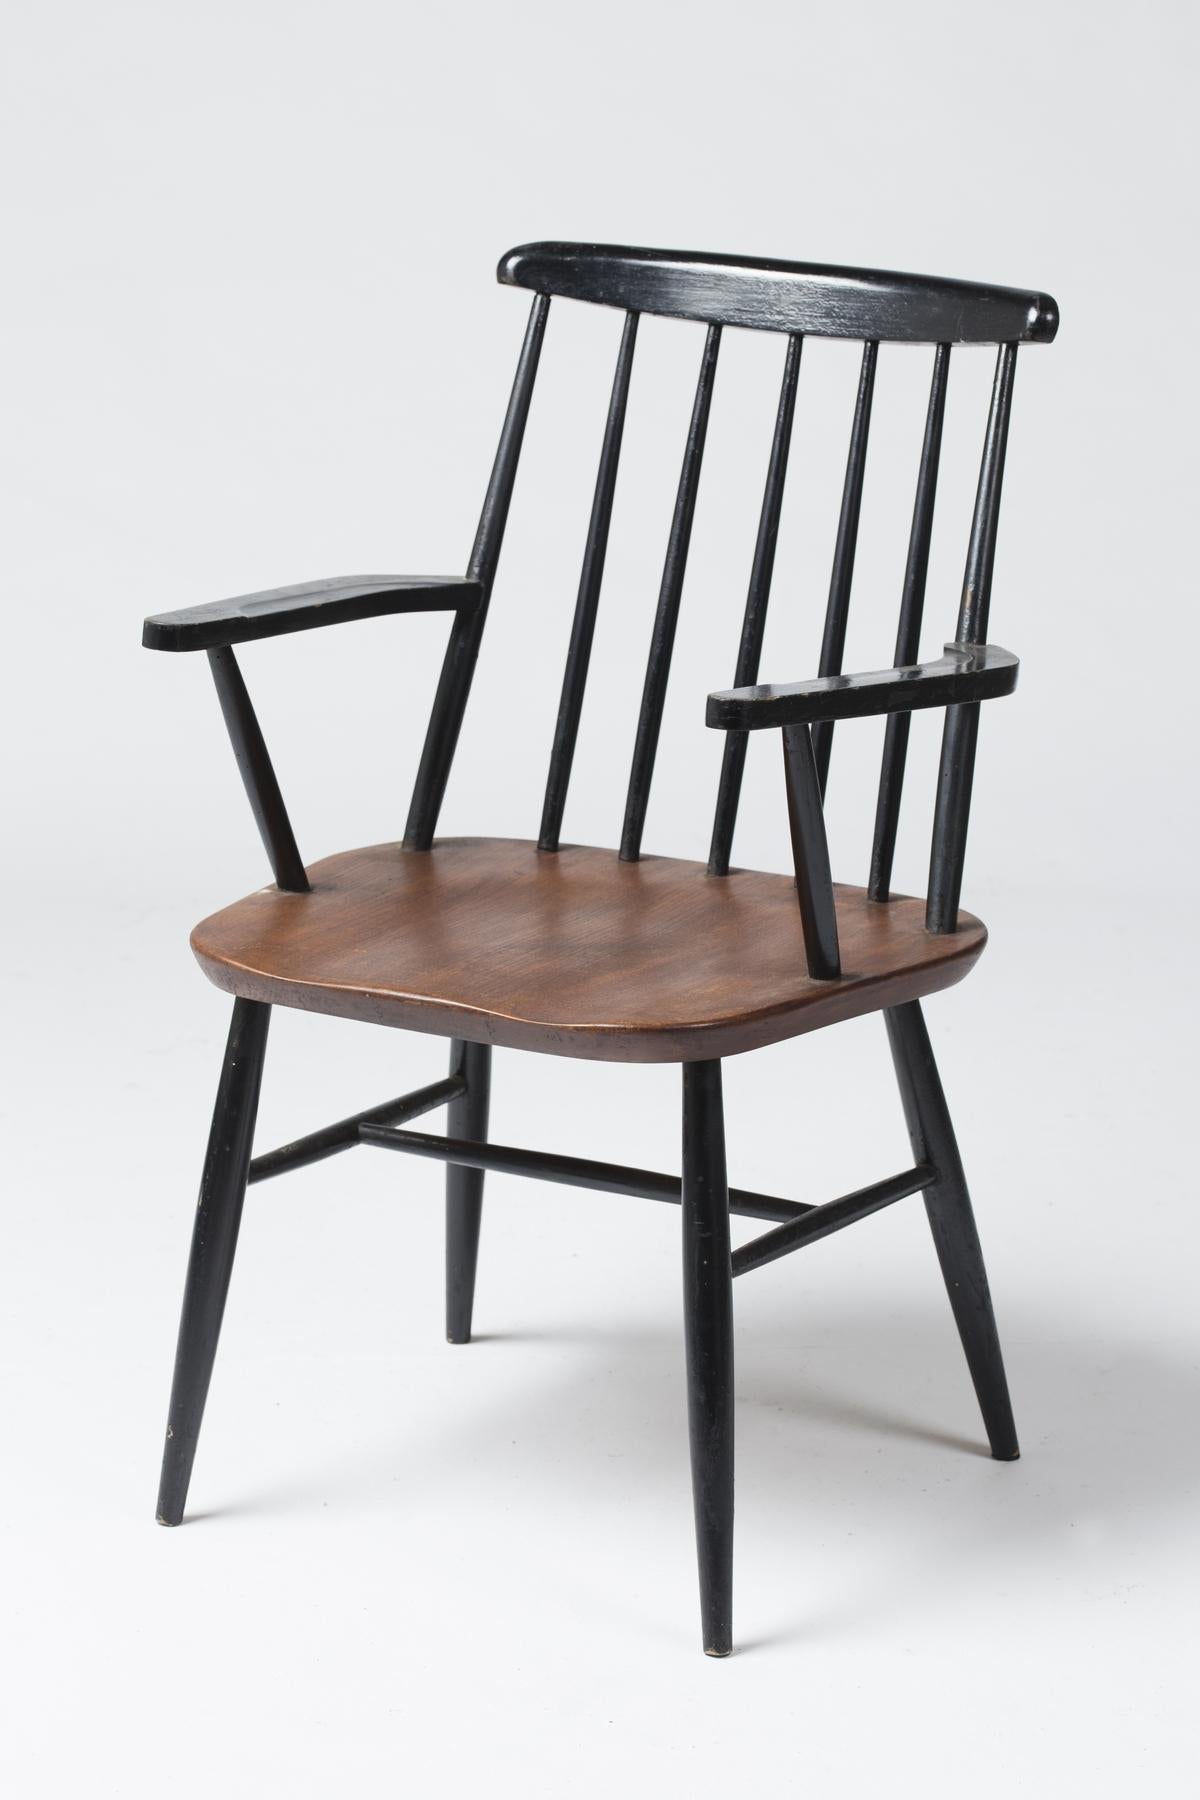 Set of six armchairs by Ilmari Tapiovaara, in blackened wood and teak, circa 1950-1960.

The modernist designer Ilmari Tapiovaara was born in 1914 in Hämeenlinna, Finland. He studied interior design and industrial design at the Institute of